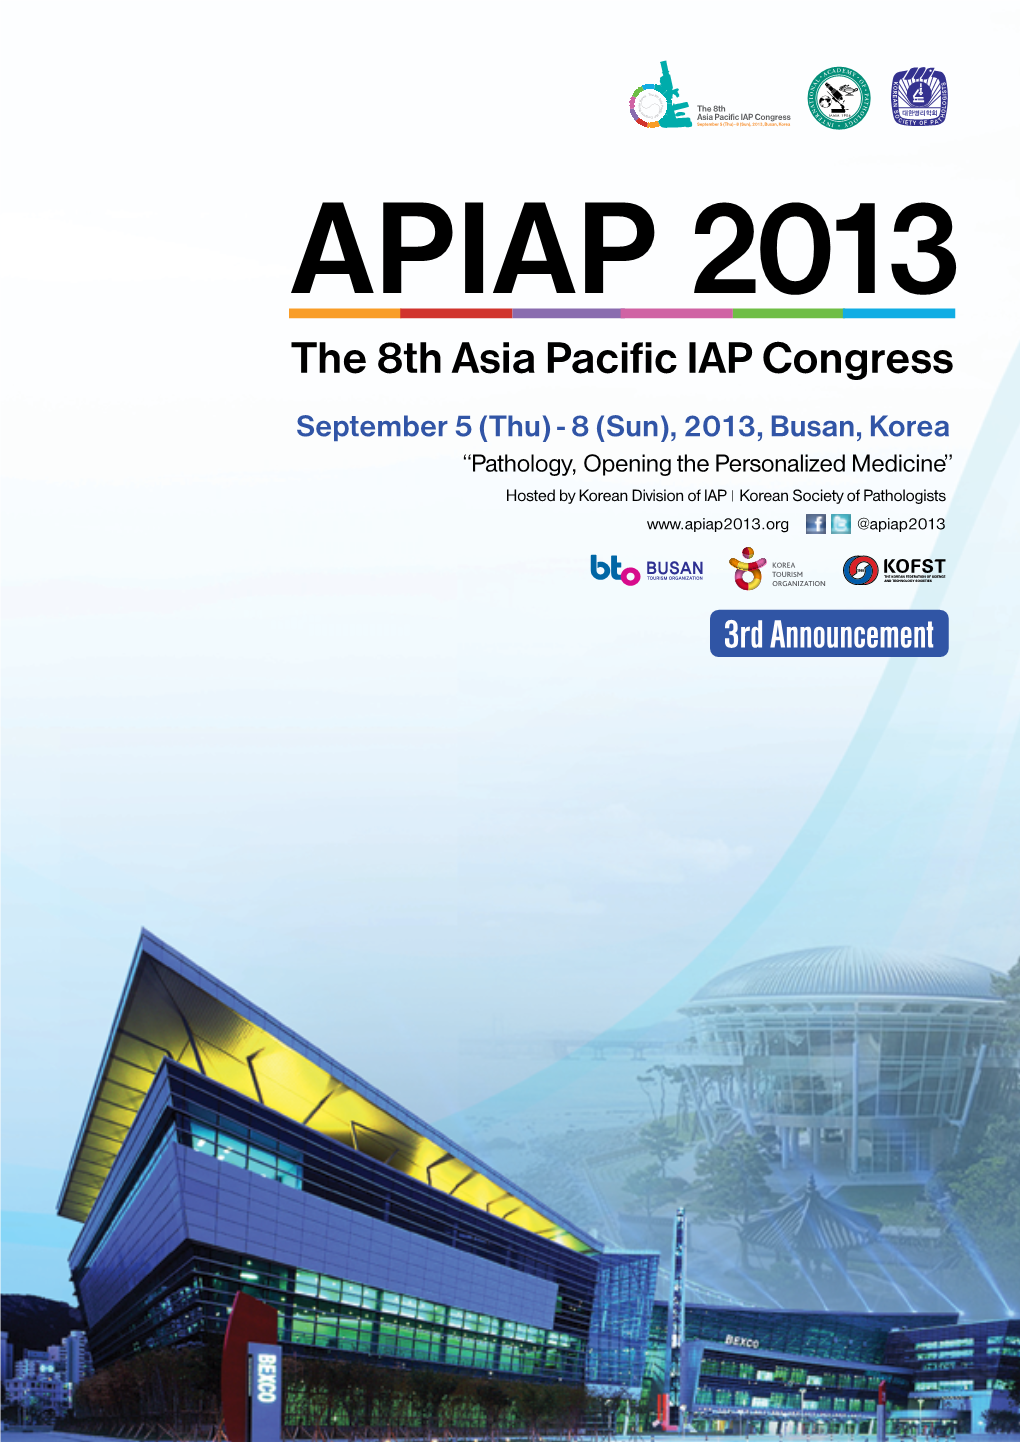 The 8Th Asia Pacific IAP Congress September 5 (Thu) - 8 (Sun), 2013, Busan, Korea APIAP 2013 the 8Th Asia Pacific IAP Congress